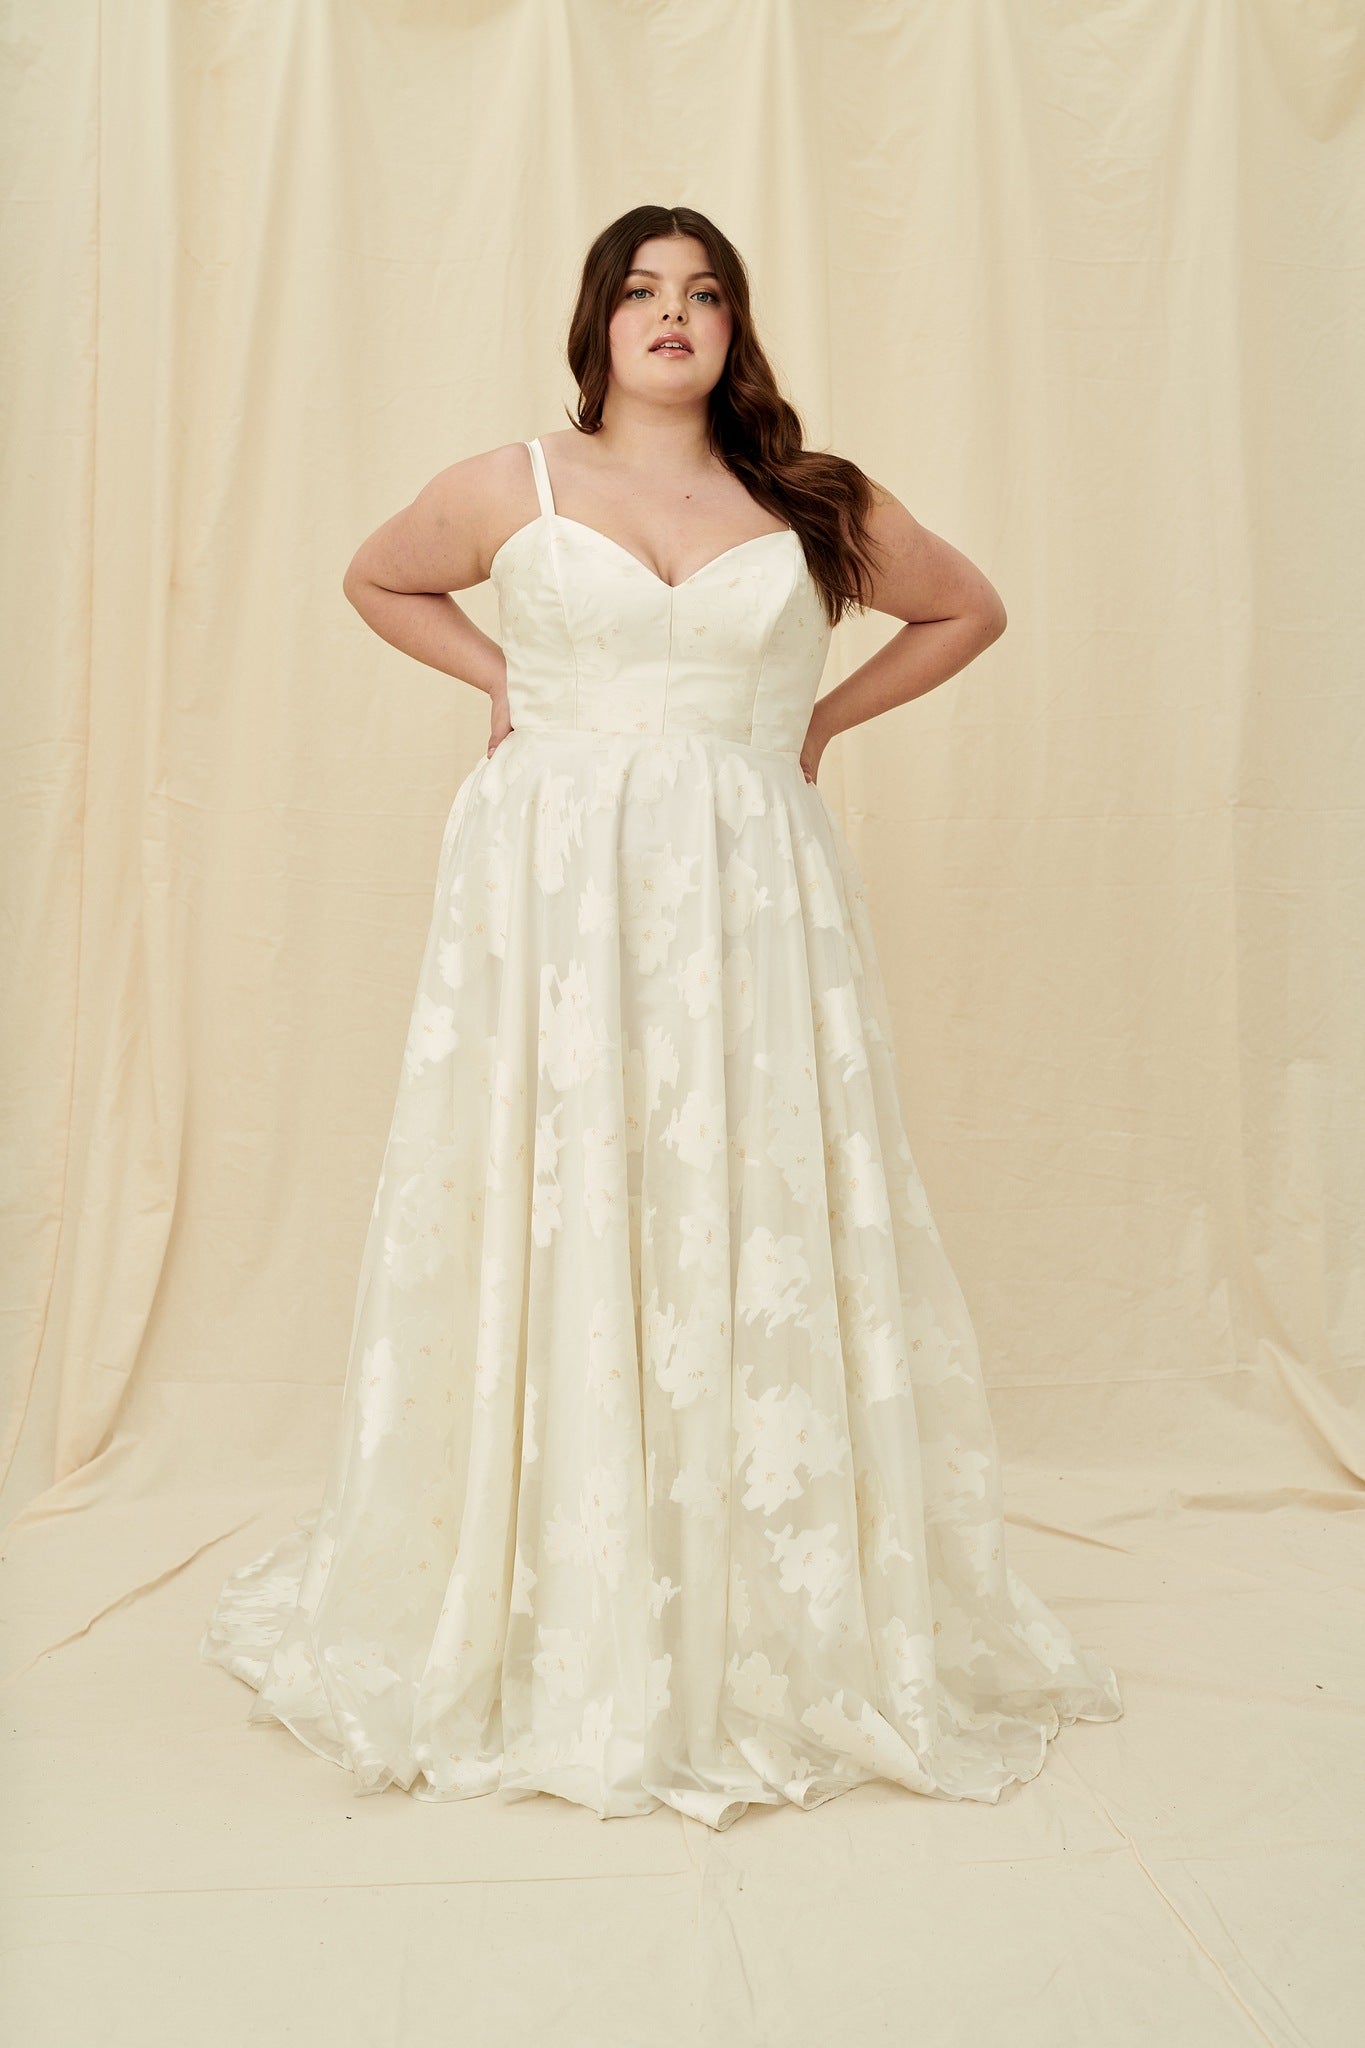 plus size wedding dresses with long trains